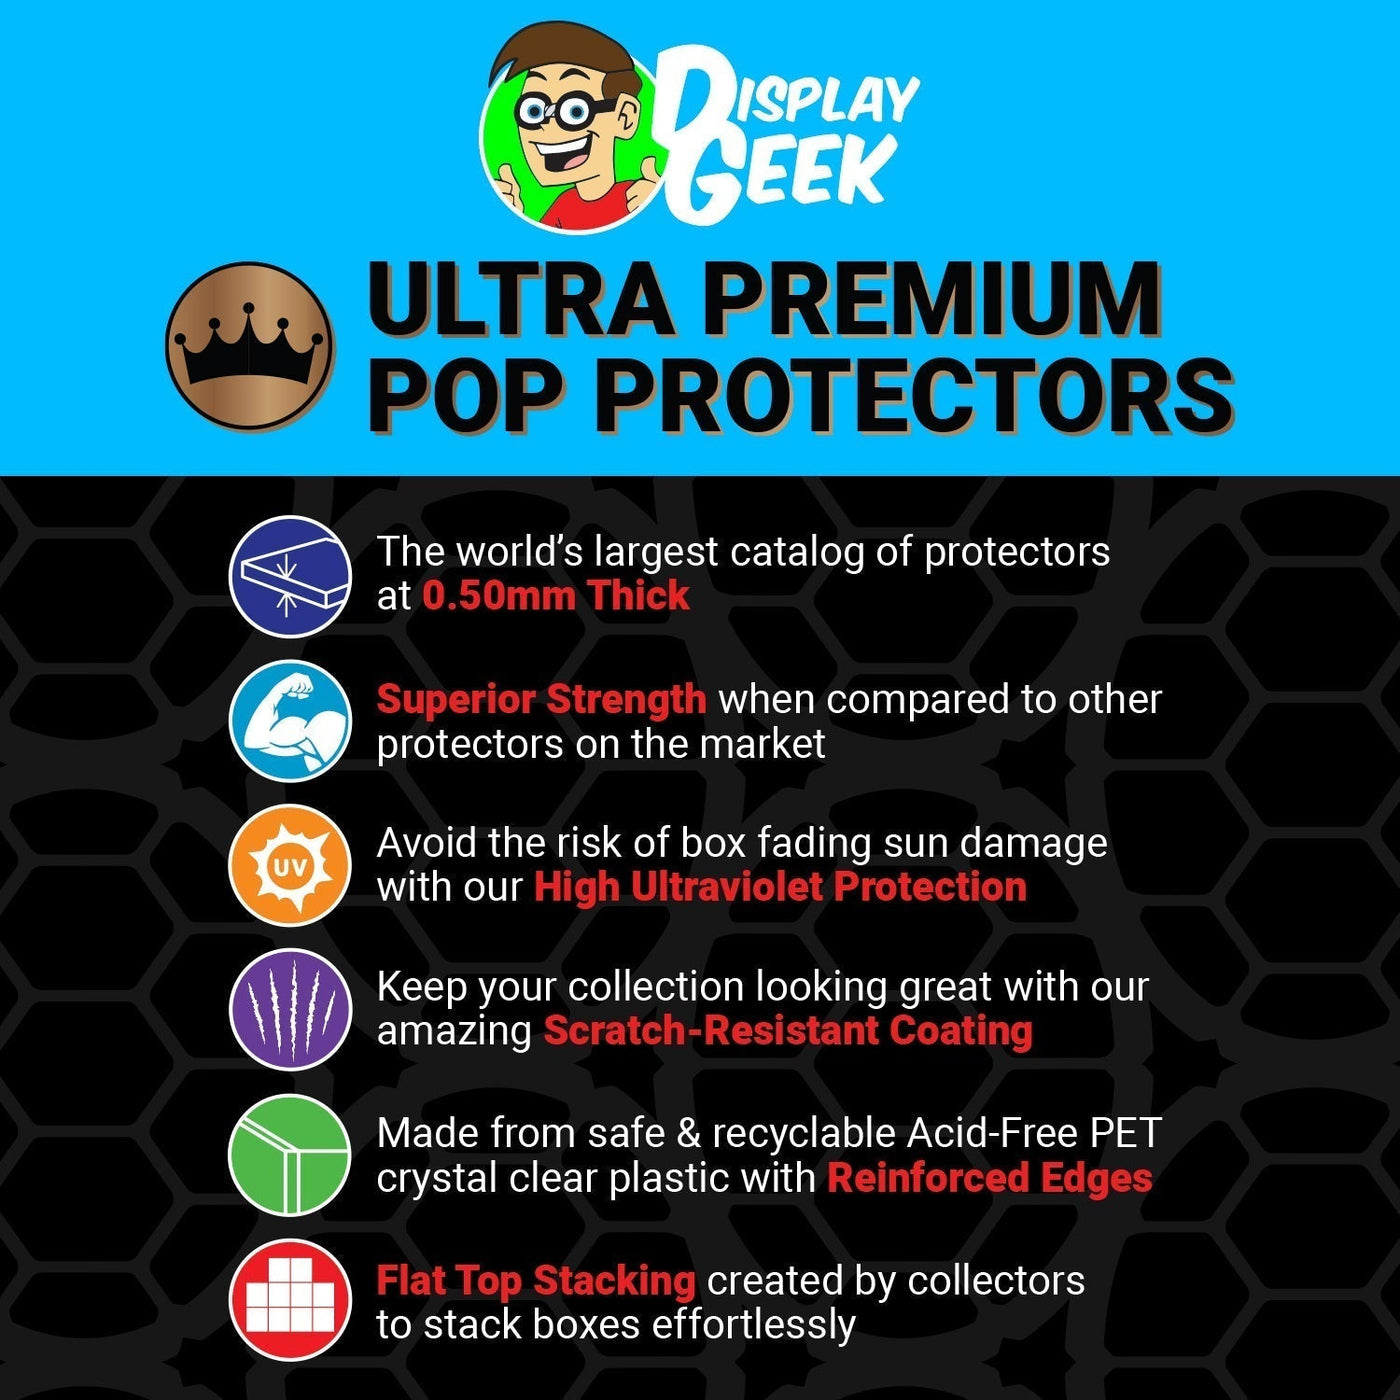 Pop Protector for Funkoverse Golden Girls Sophia & Dorothy 101 Funko 2 Pack on The Protector Guide App by Display Geek